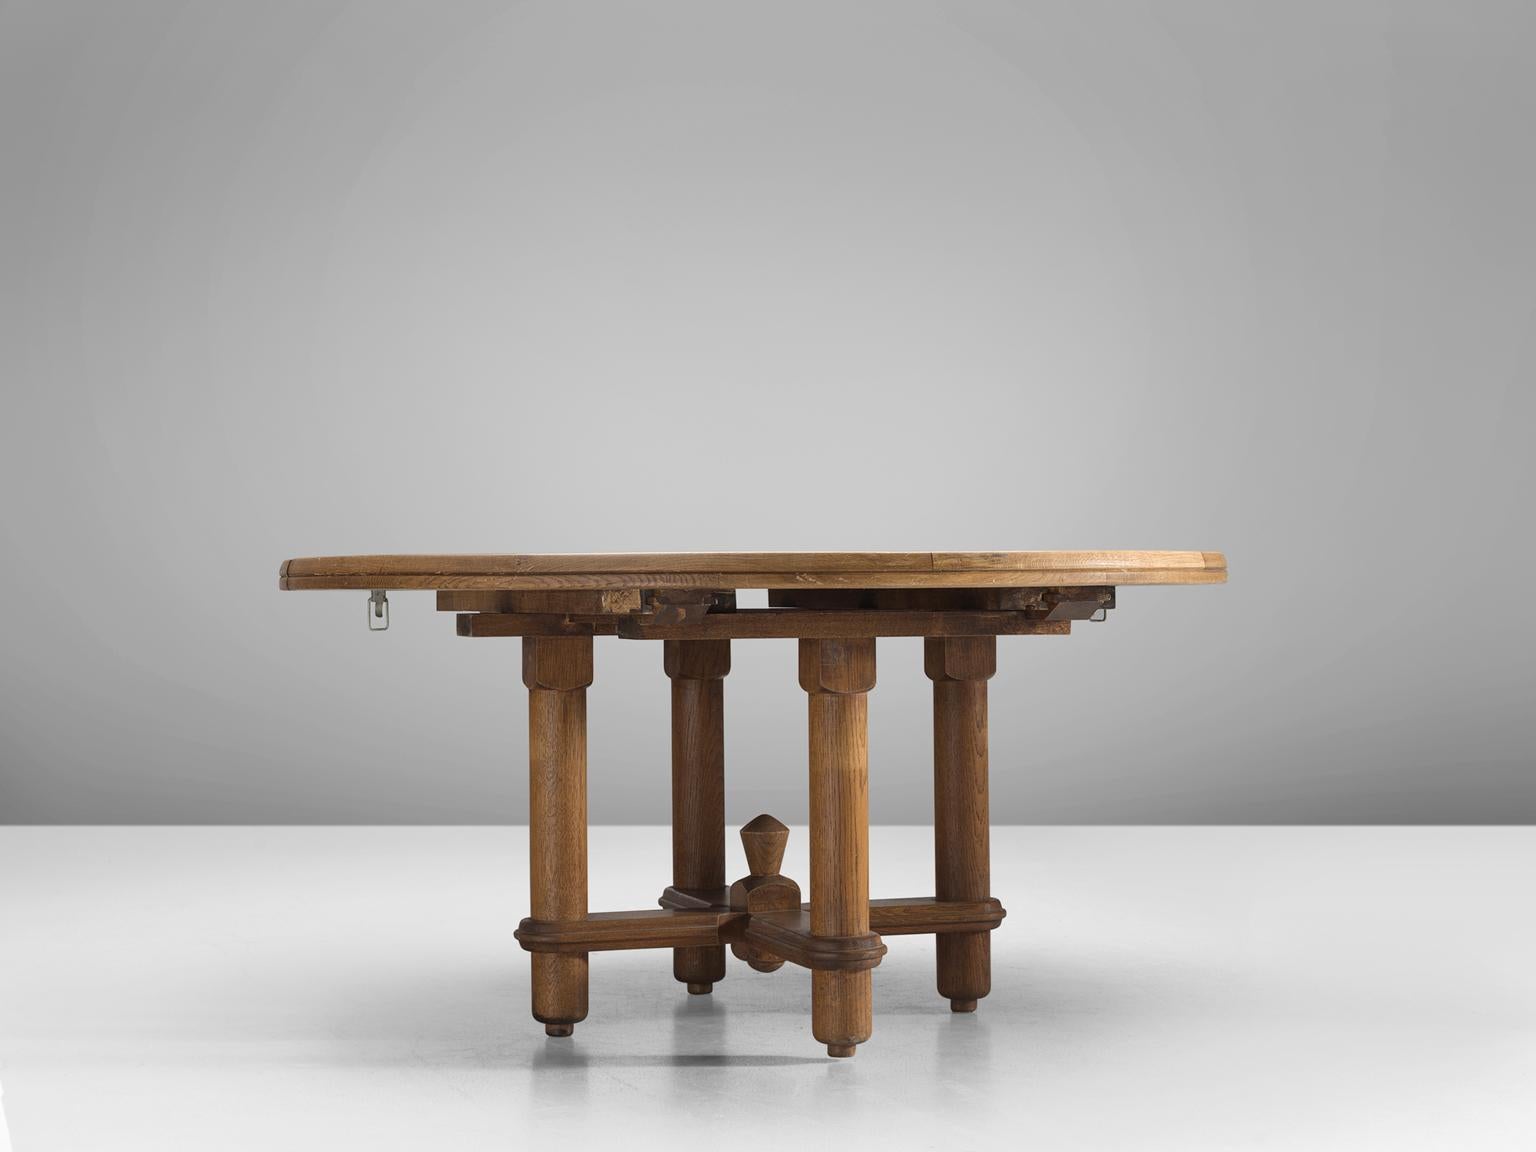 Guillerme et Chambron for Votre Maison, table 'Victorine', in oak, France 1970.

This wonderful table shows great craftsmanship and a strong appearance, that clearly characterizes the work of Guillerme & Chambron. The top of the table has beautiful